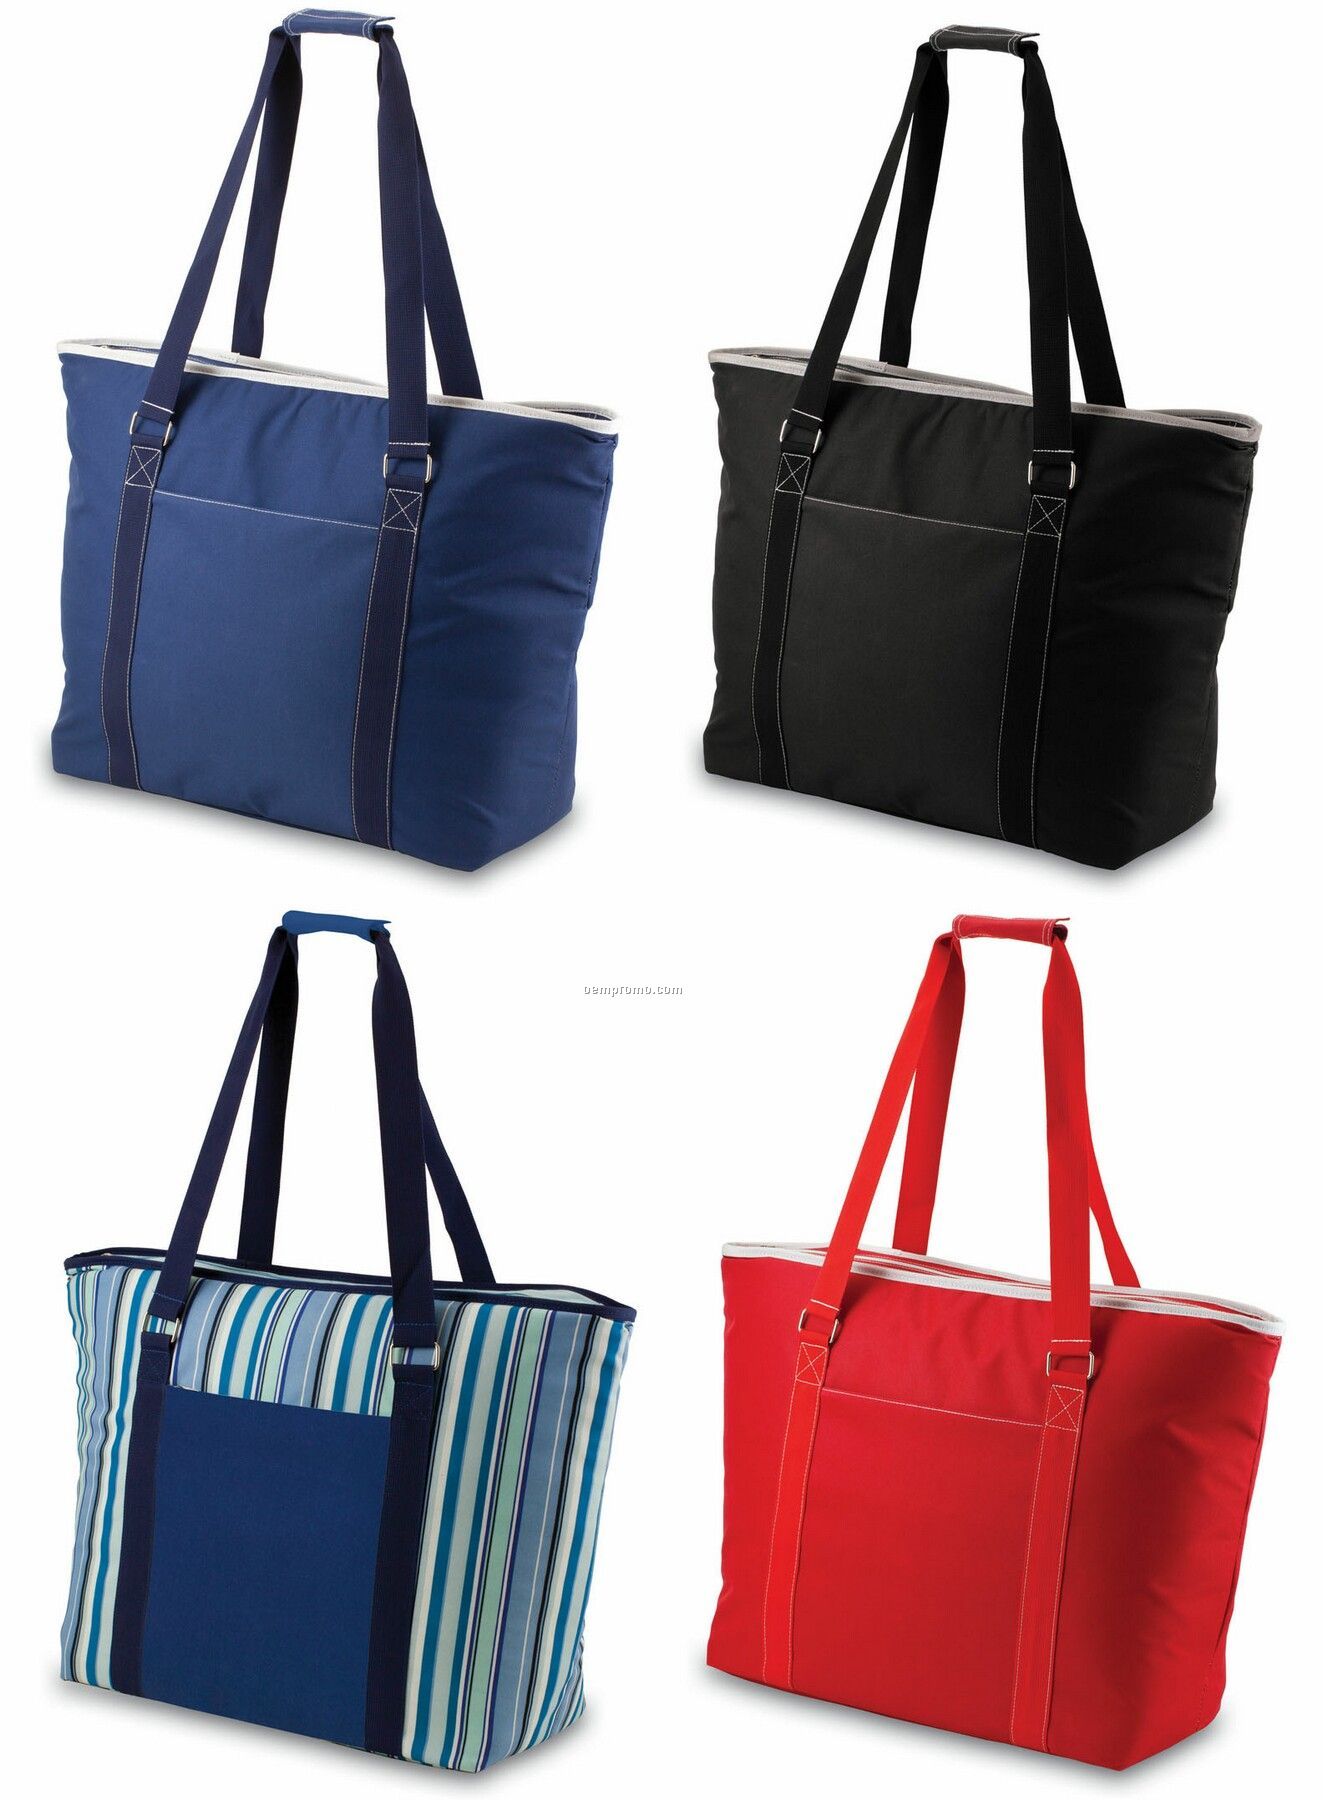 Tahoe Canvas Cooler Tote Bag W/ Pocket - Solids (48 Can Capacity)